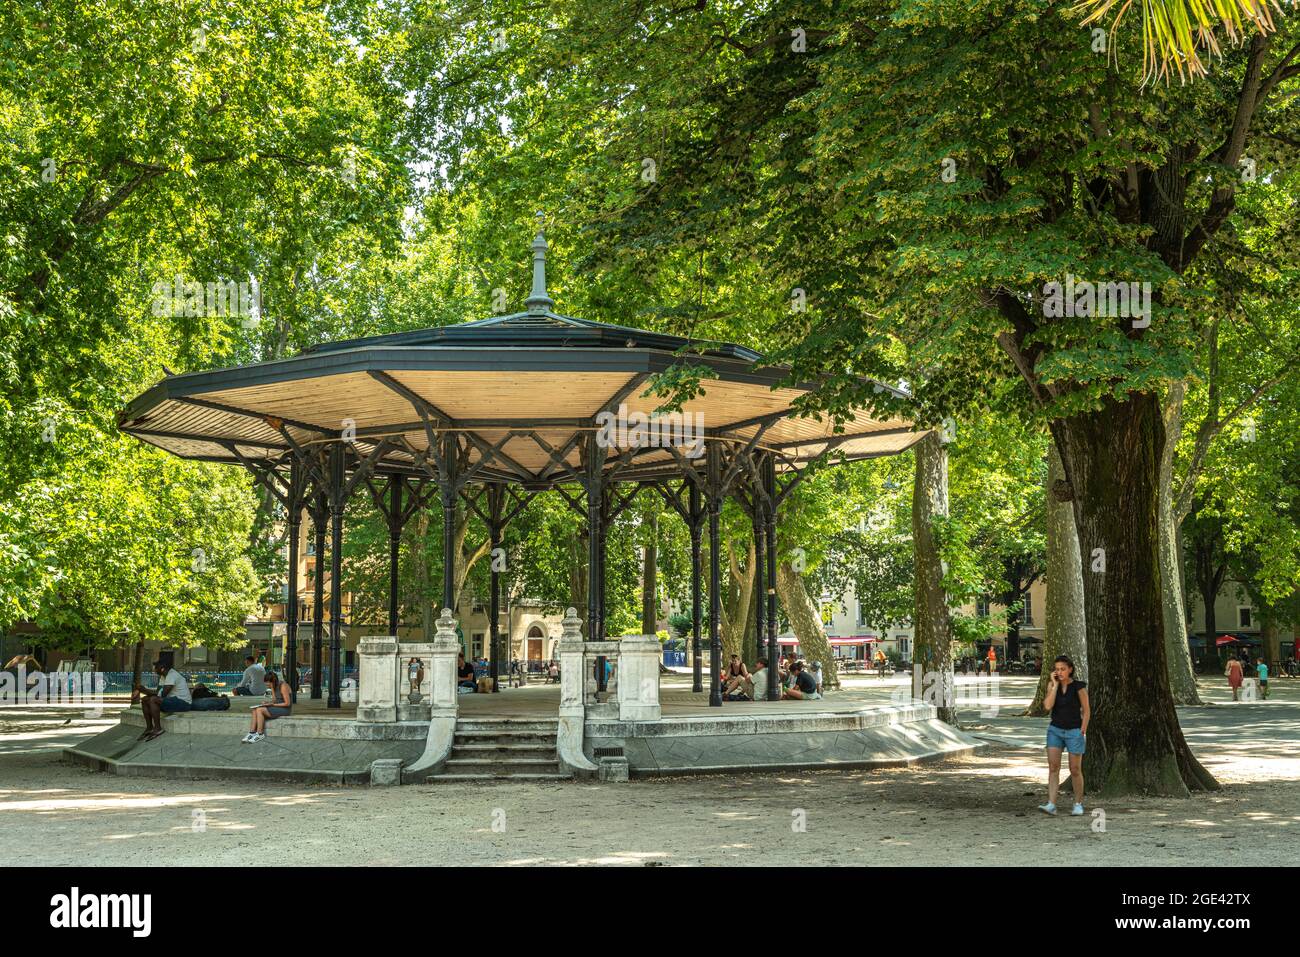 Gazebo in the park, meeting point for young people and tourists in Grenoble. Grenoble, Isère département, Auvergne-Rhône-Alpes Region, France, Europe Stock Photo